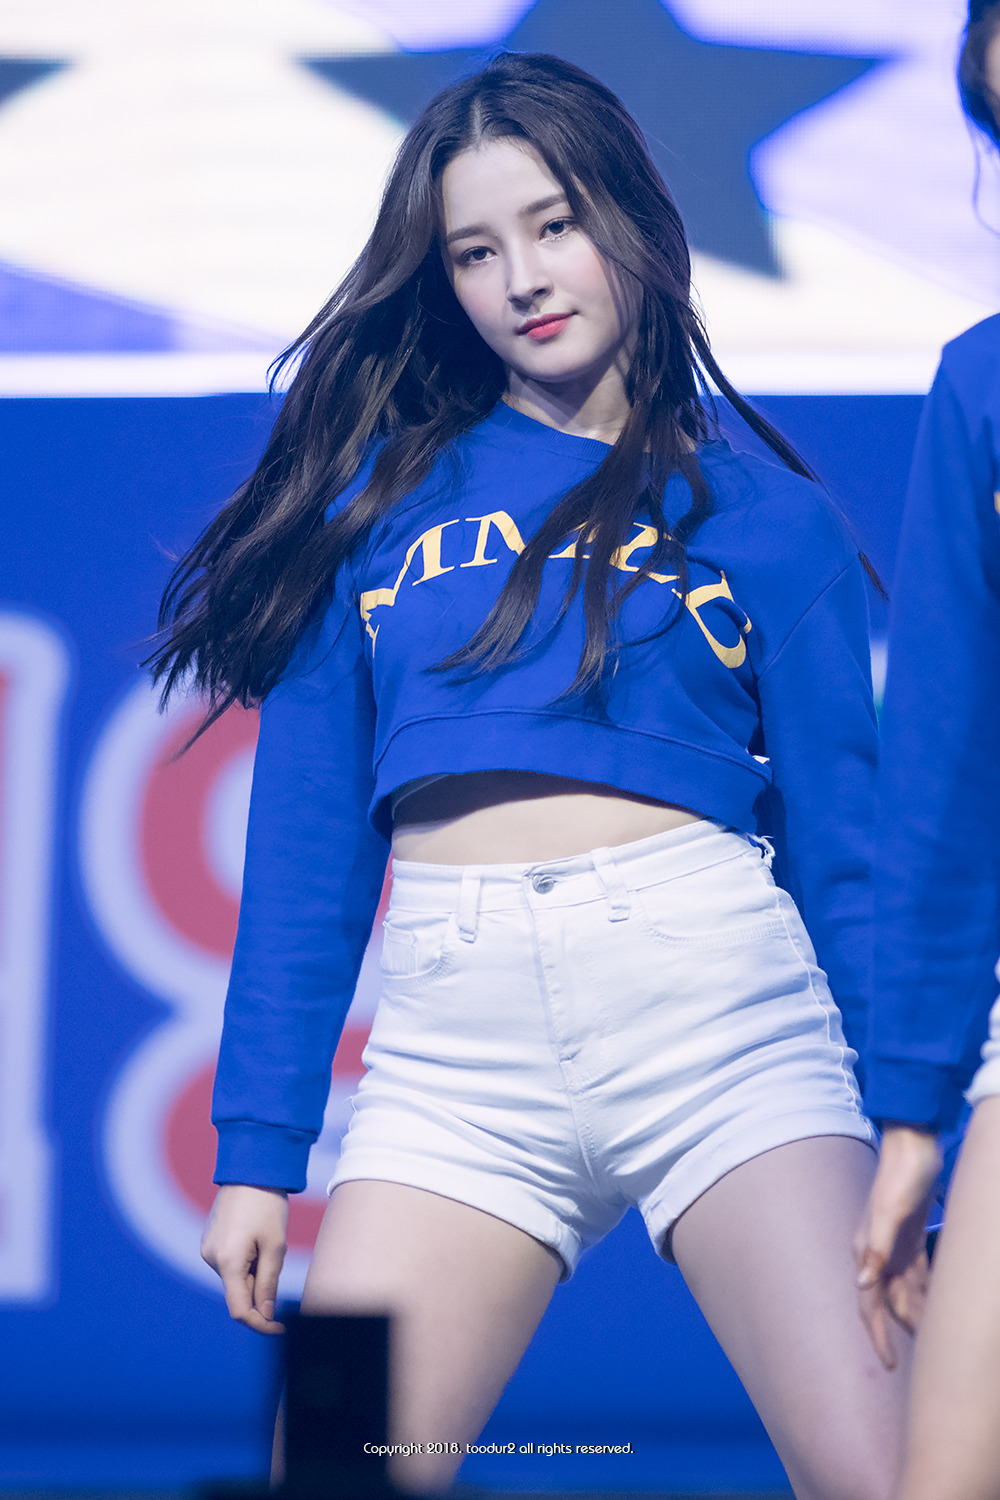 THE MOST SEXIEST OUTFIT OF NANCY MOMOLAND